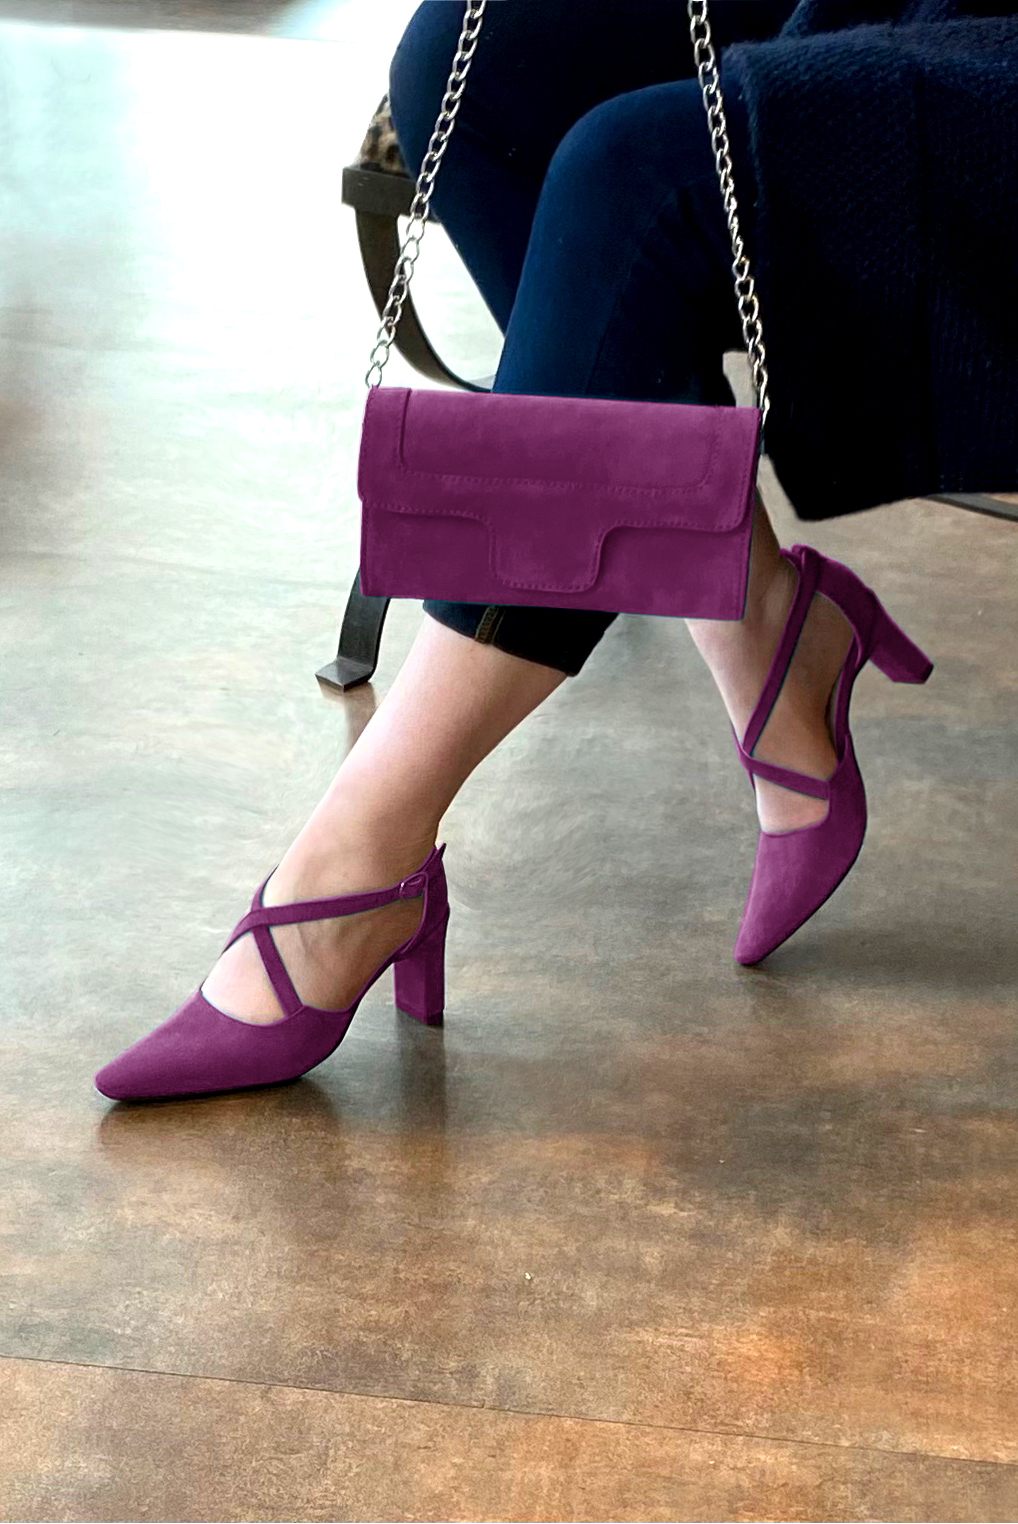 Mulberry purple women's open side shoes, with crossed straps. Tapered toe. High comma heels. Worn view - Florence KOOIJMAN